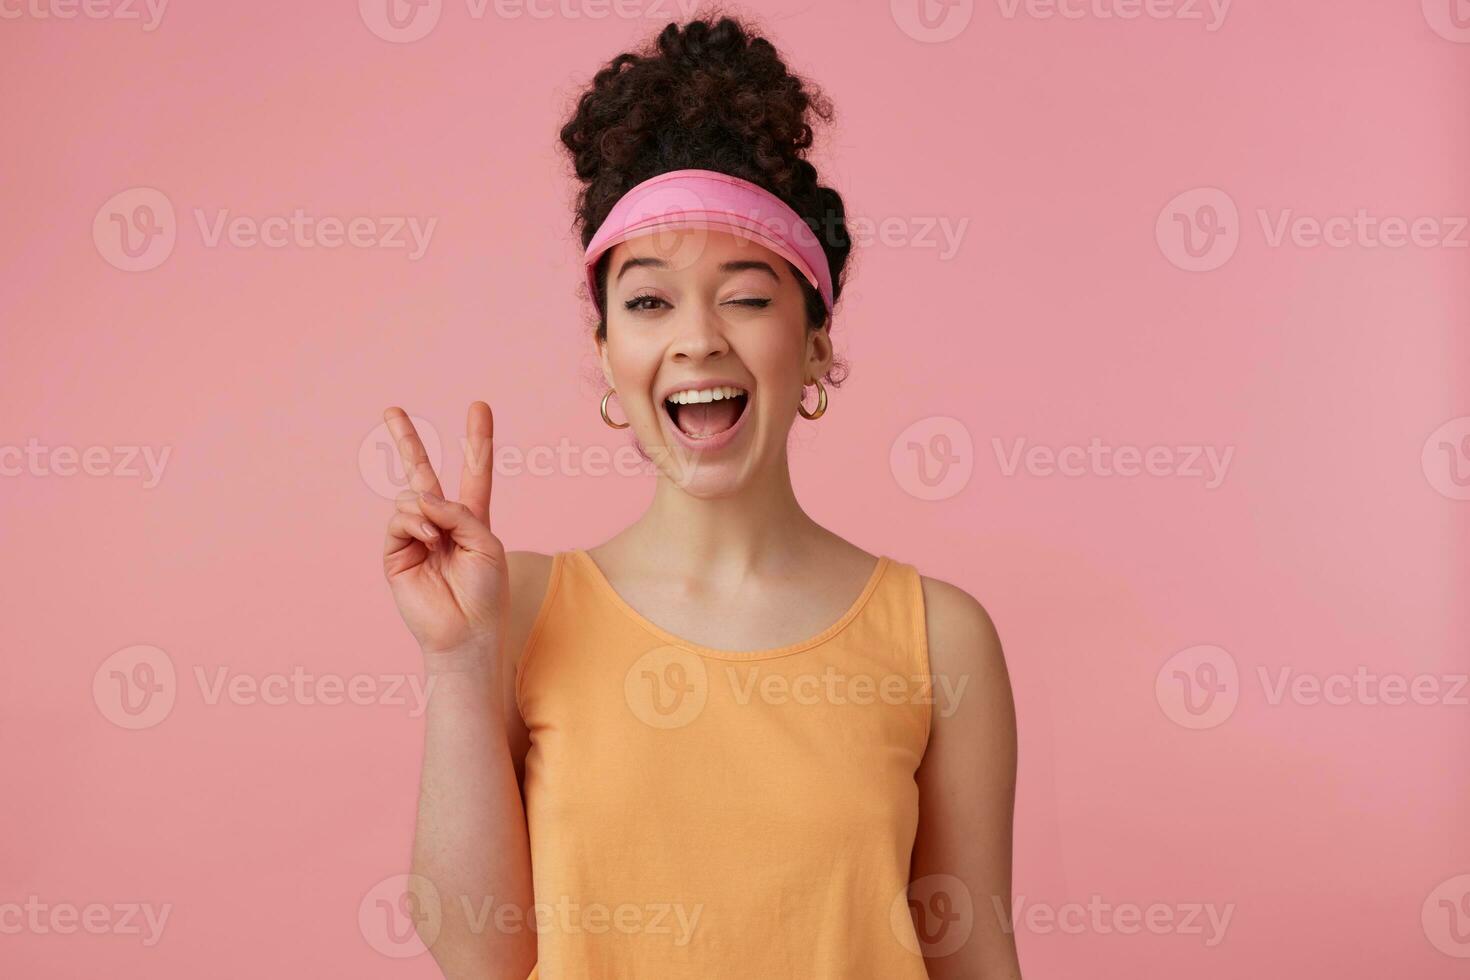 Teenage girl, flirty looking woman with dark curly hair bun. Wearing pink visor, earrings and orange tank top. Has make up. Shows peace sing. Winks at the camera isolated over pastel pink background photo